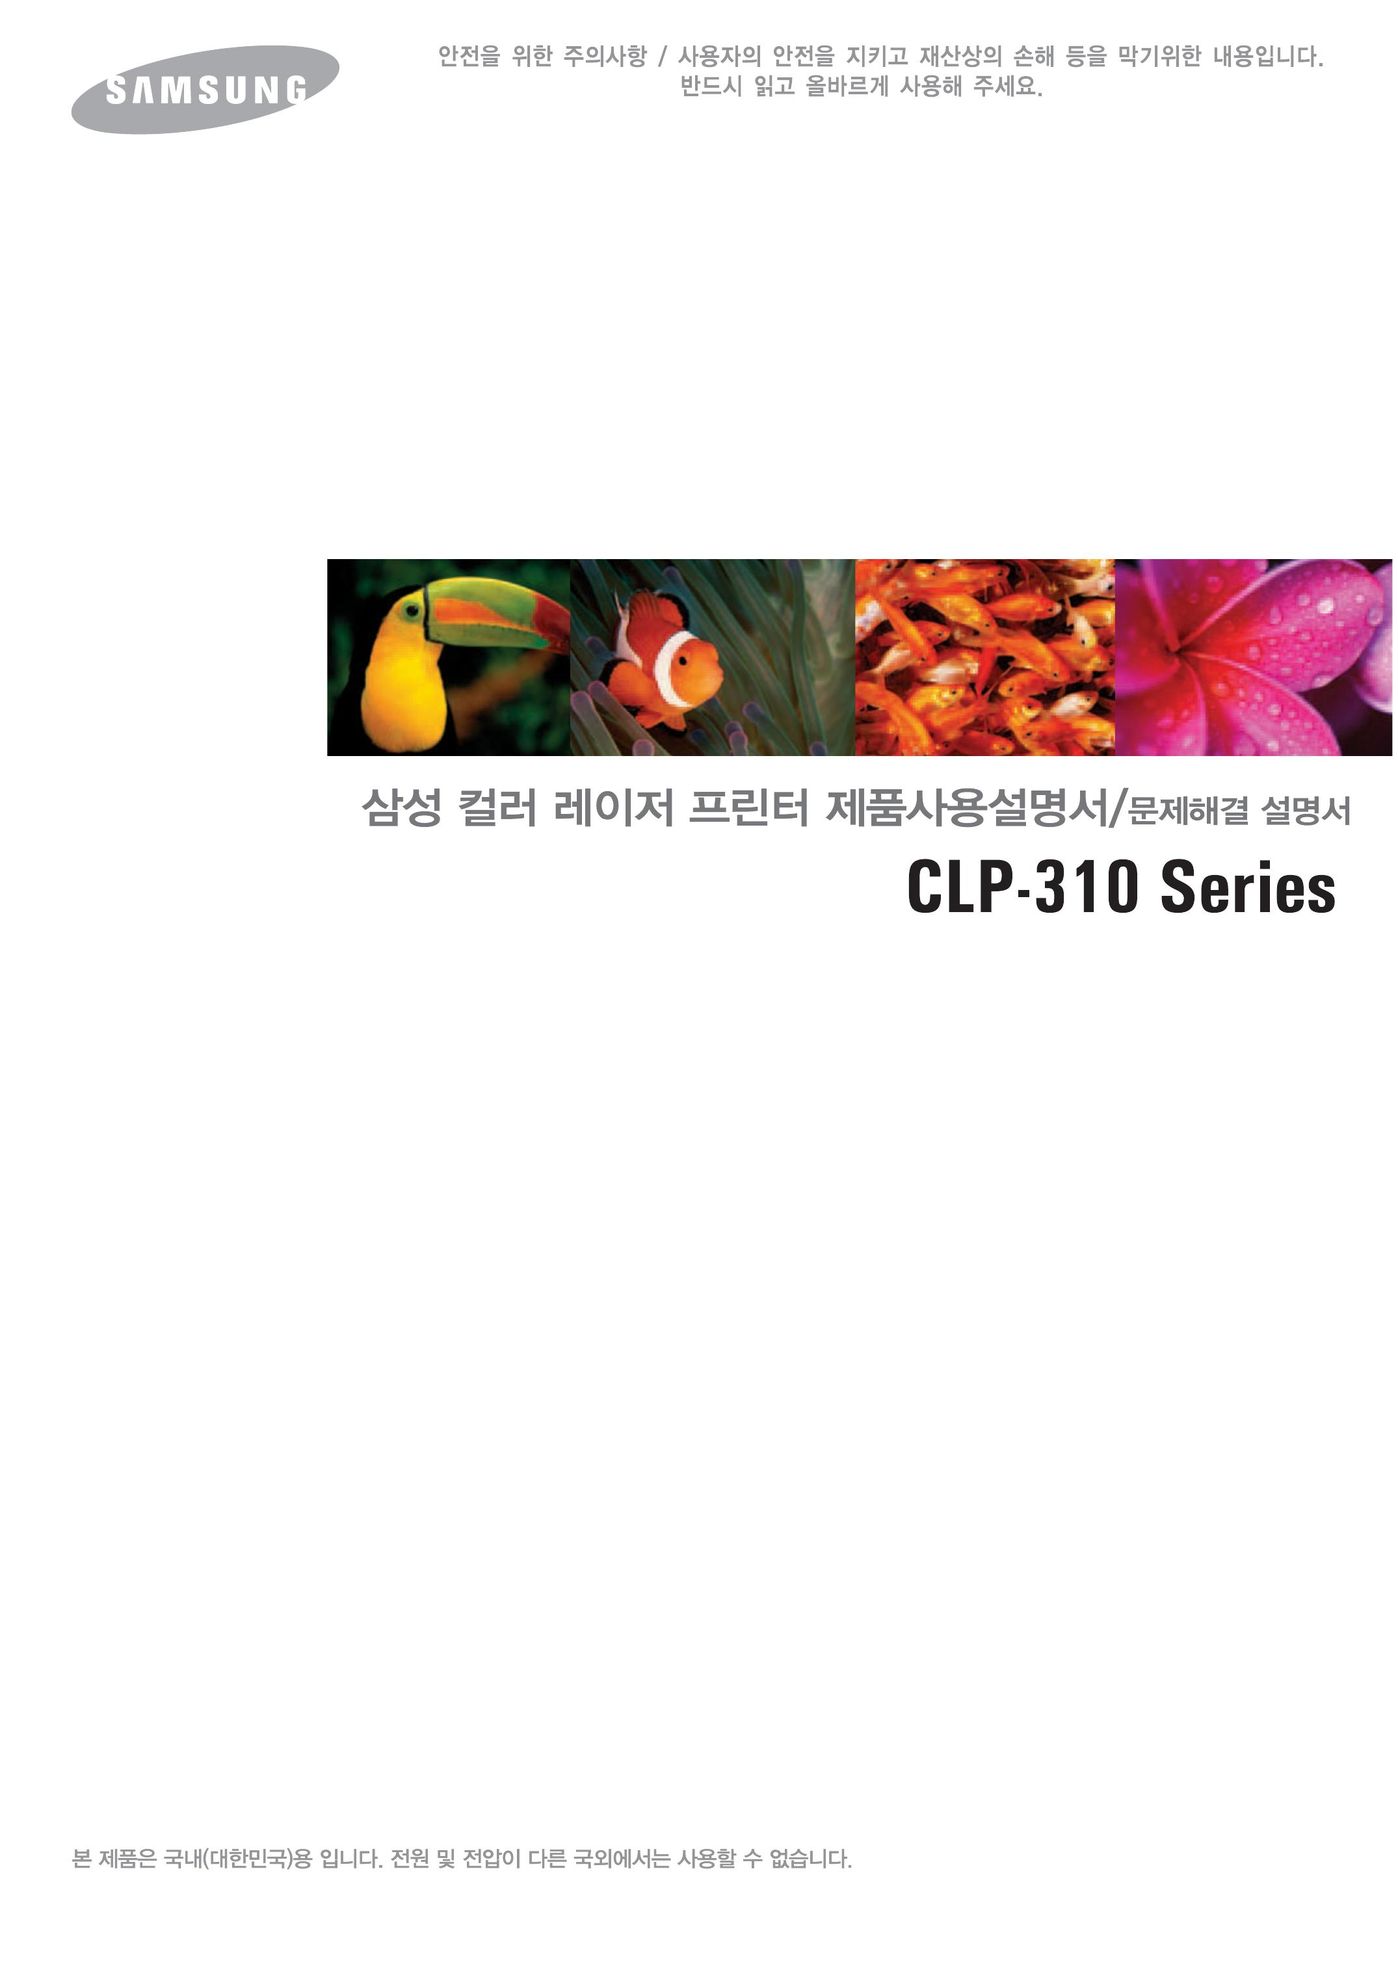 Samsung CLP-310NK All in One Printer User Manual